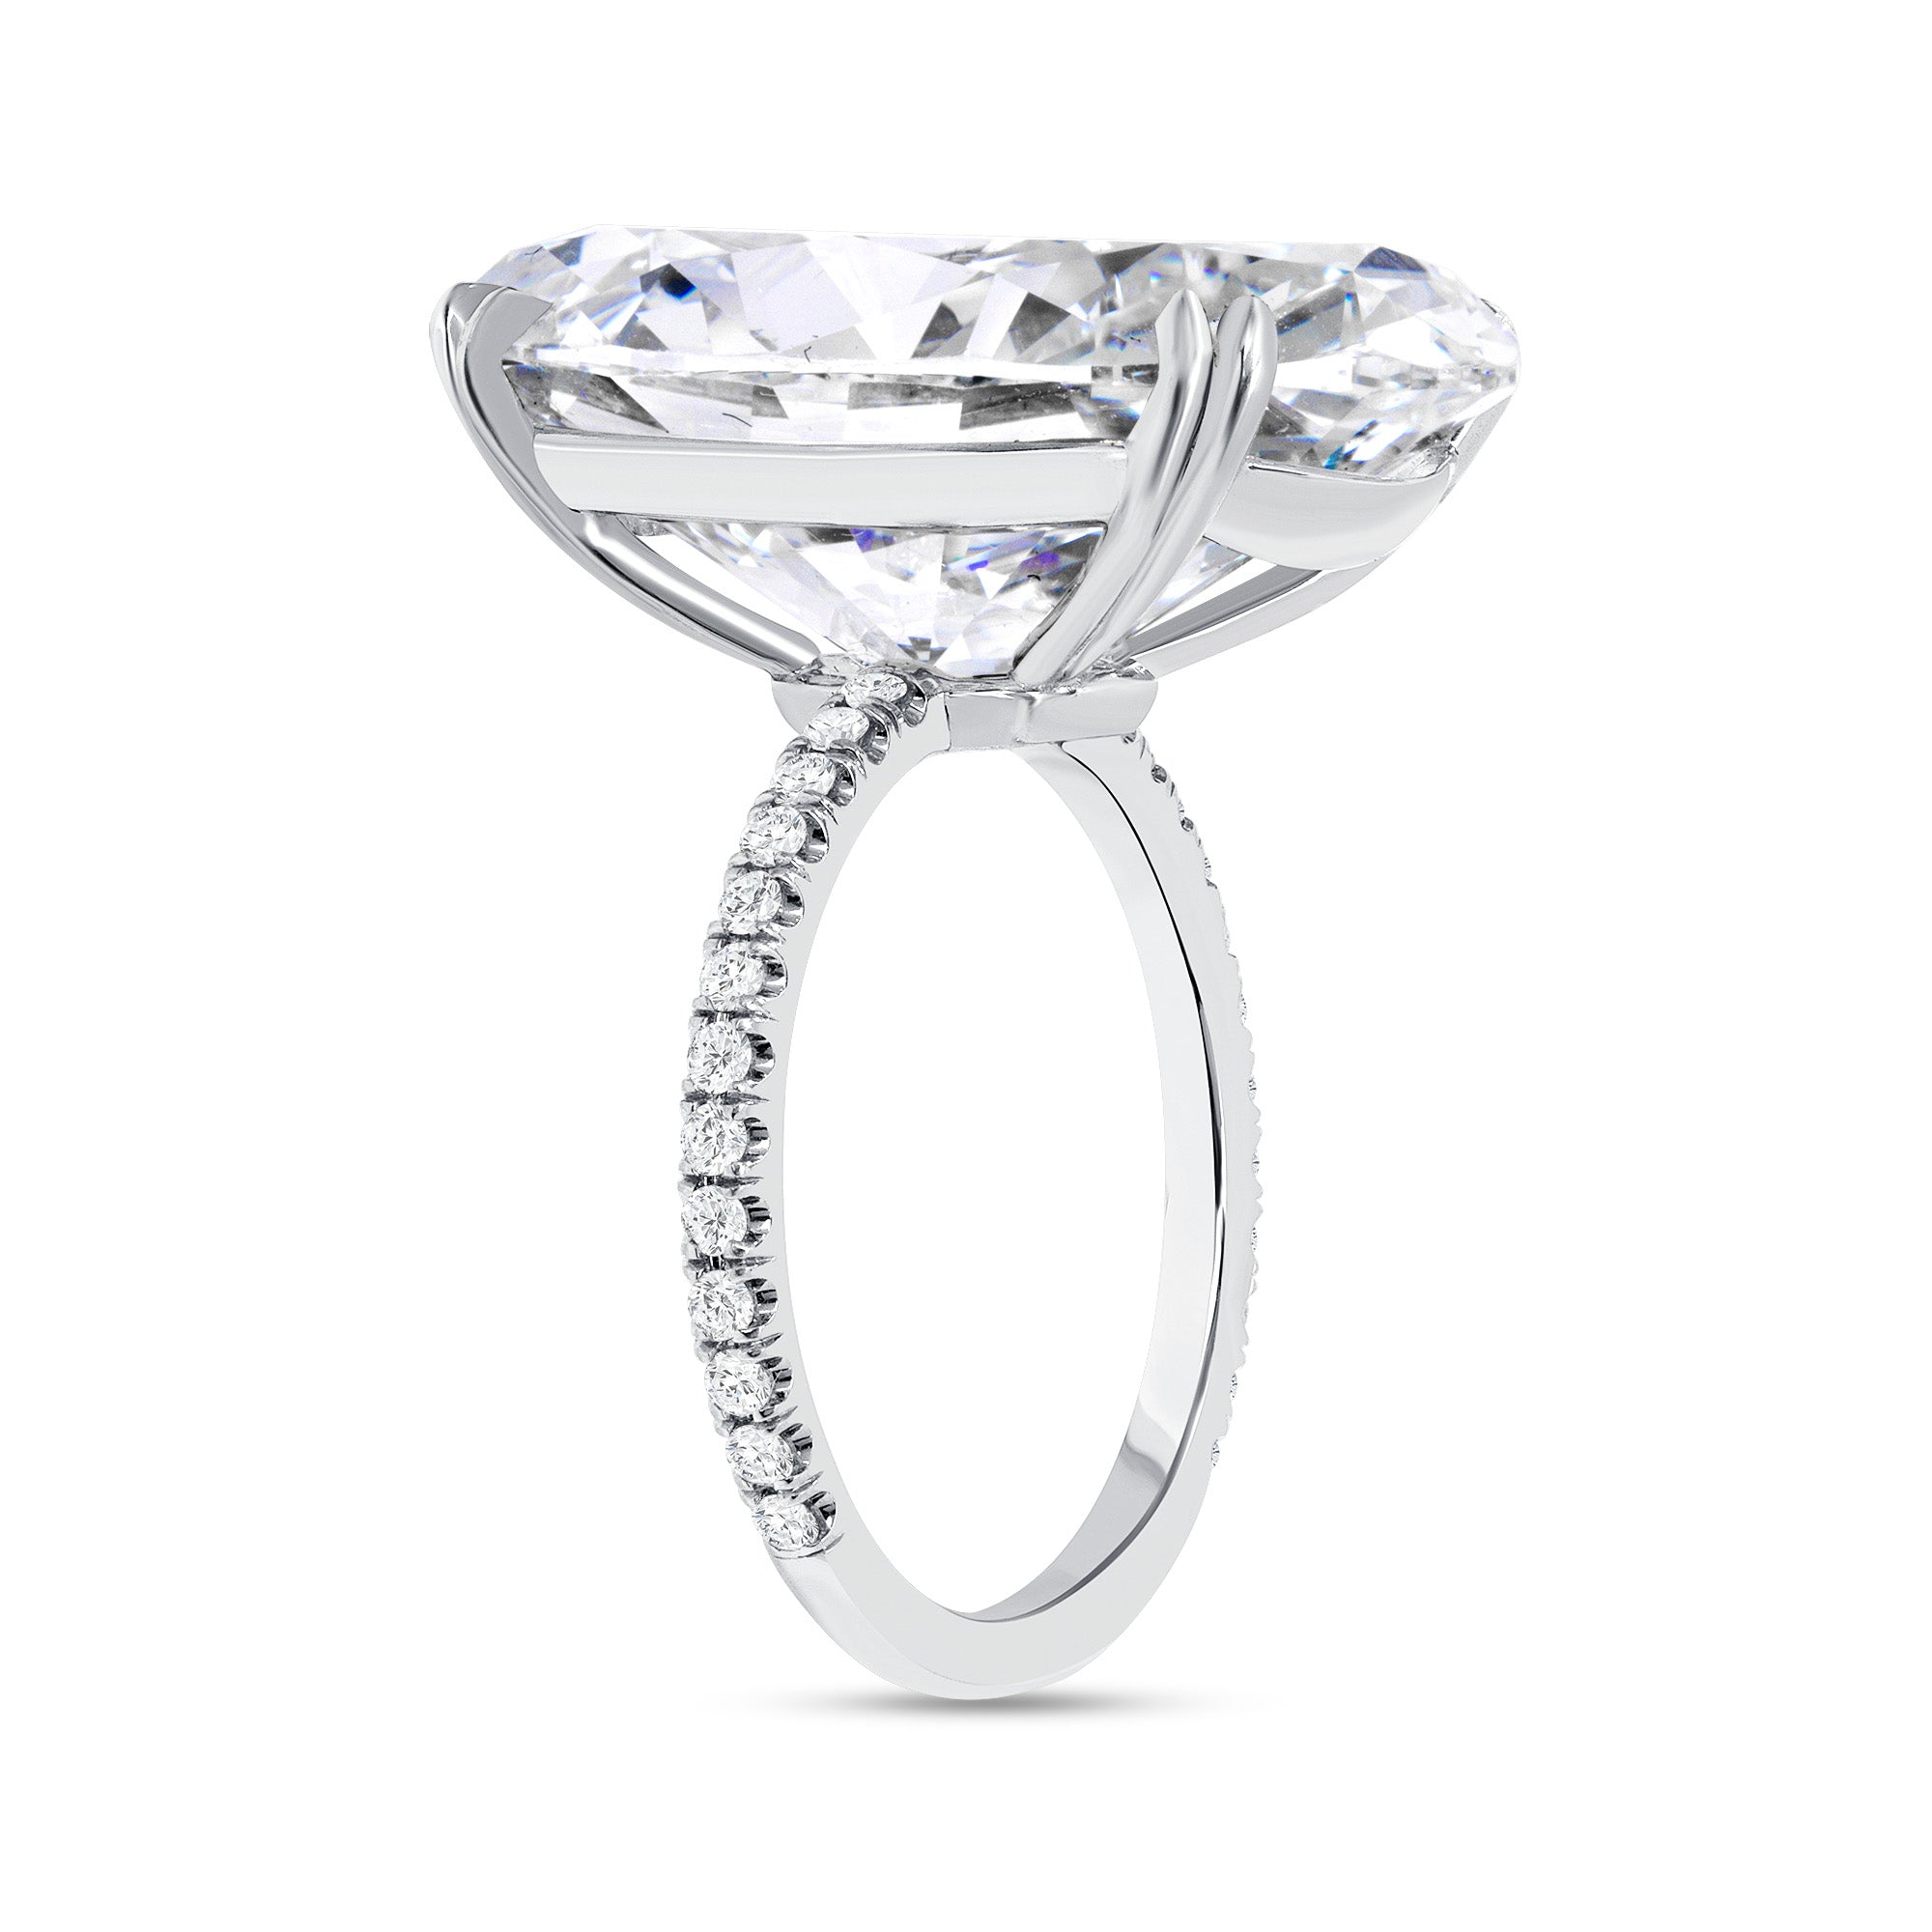 20CT Oval Diamond Ring with Pave Ring Shank